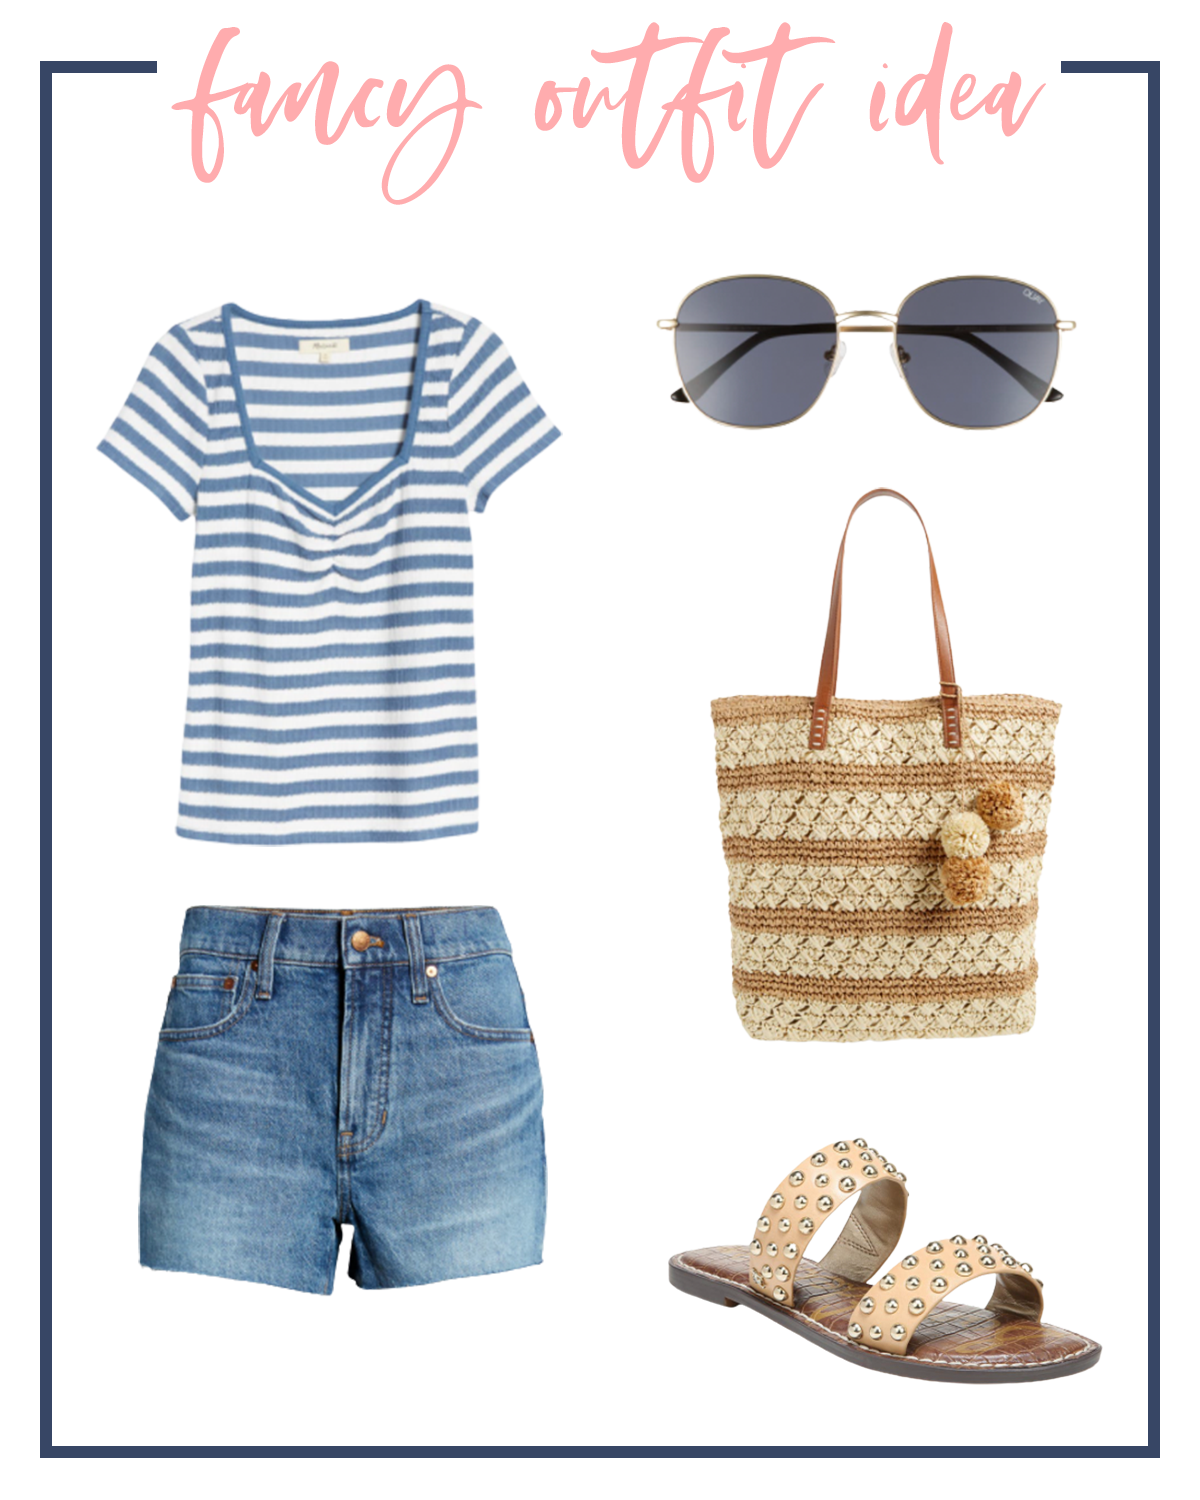 Denim Shorts by popular Houston fashion blog, Fancy Ashley: image of a blue and white stripe t-shirt, sunglasses, denim shorts, studded slide sandals, and a woven tote bag. 